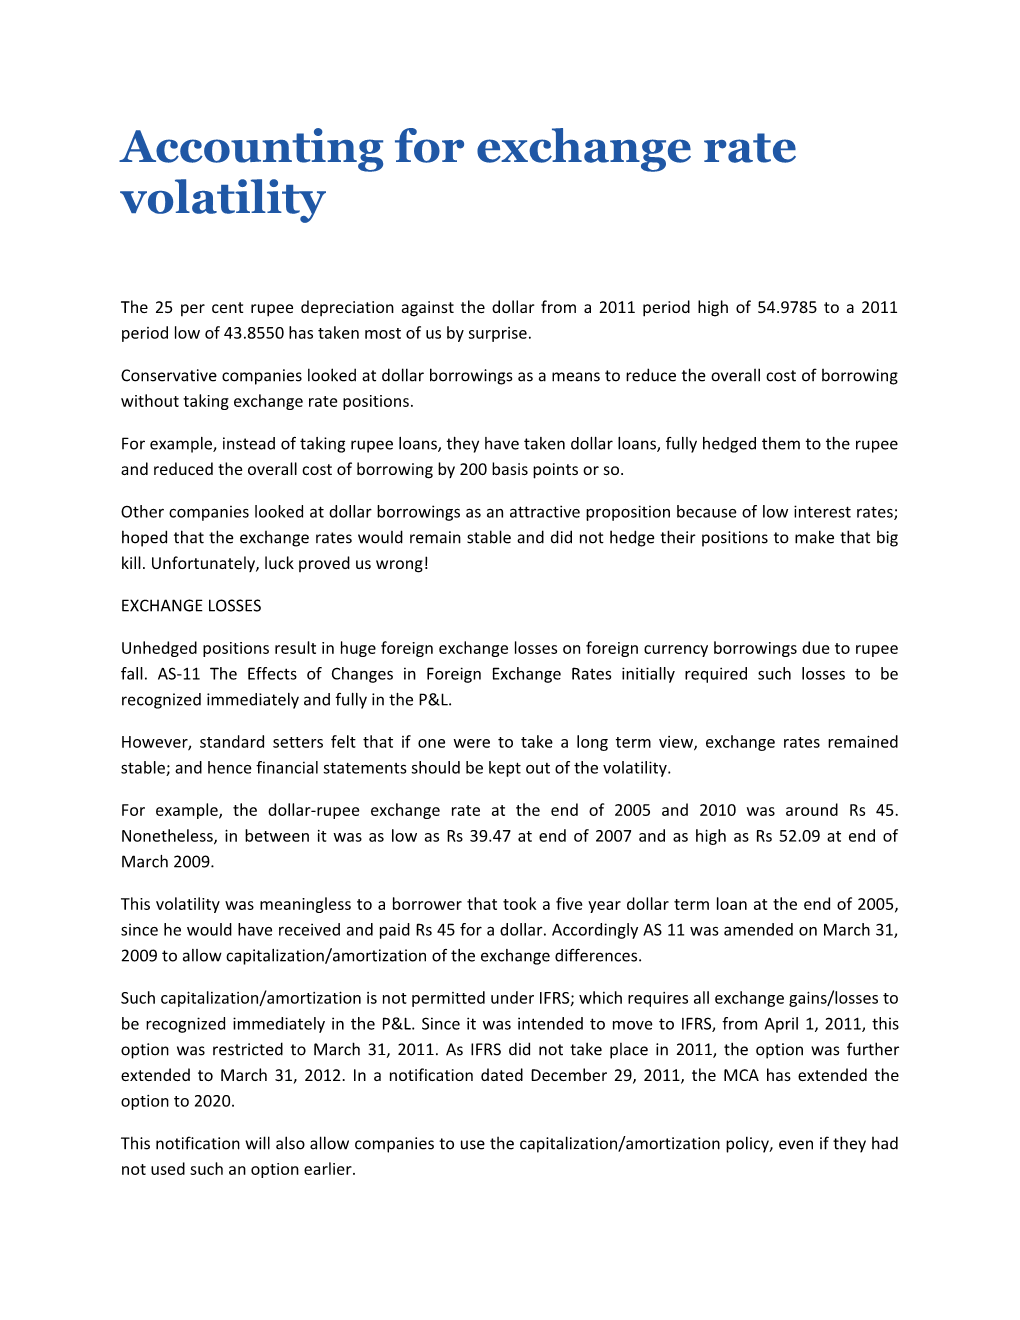 Accounting for Exchange Rate Volatility